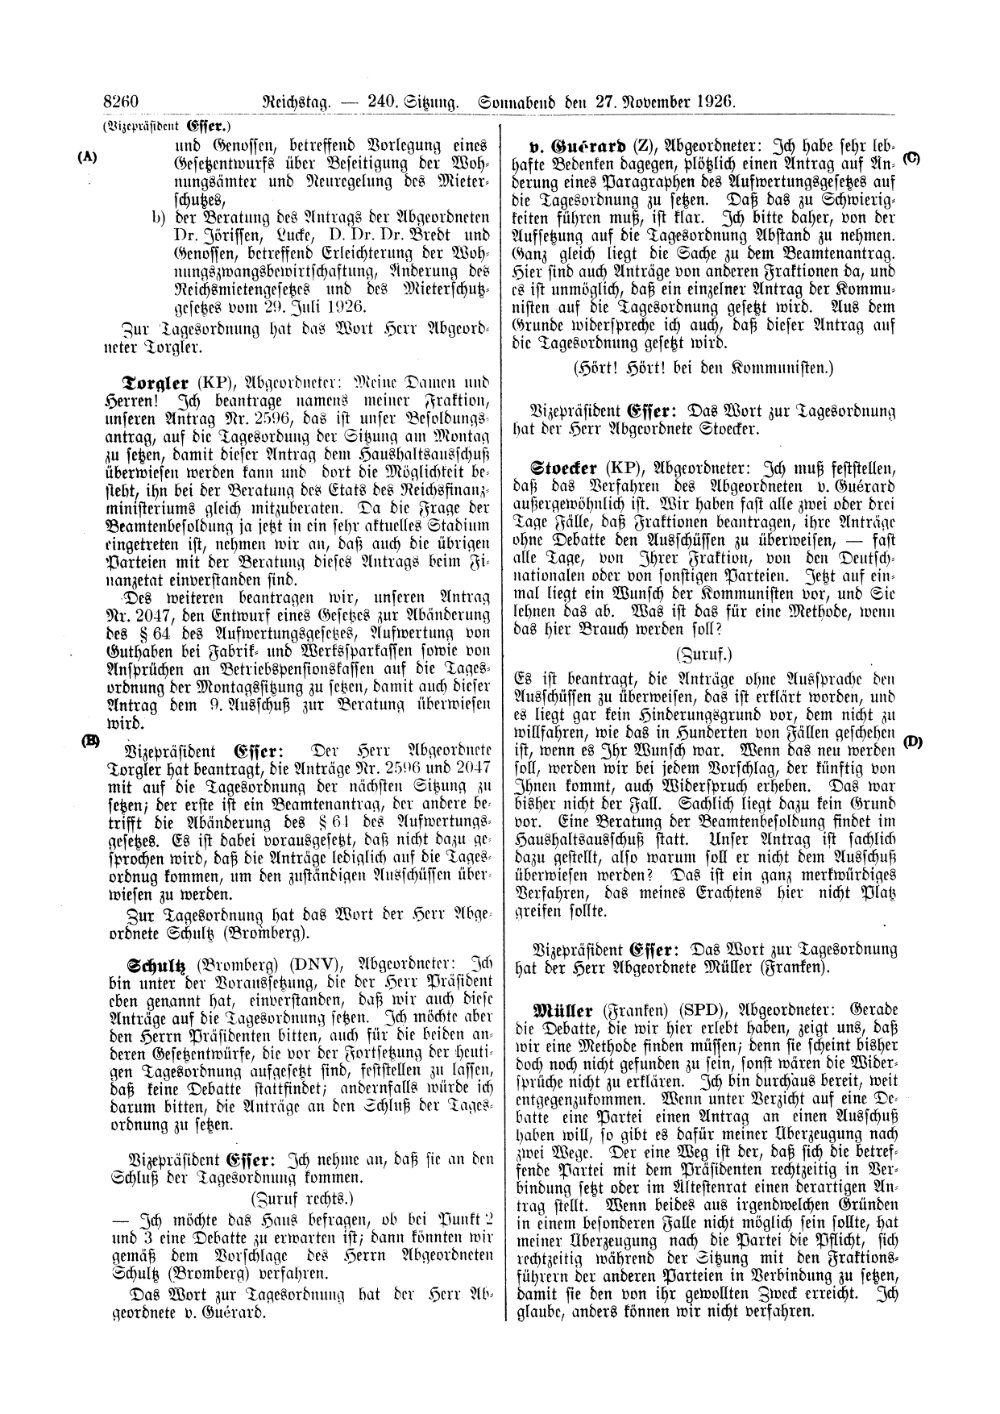 Scan of page 8260